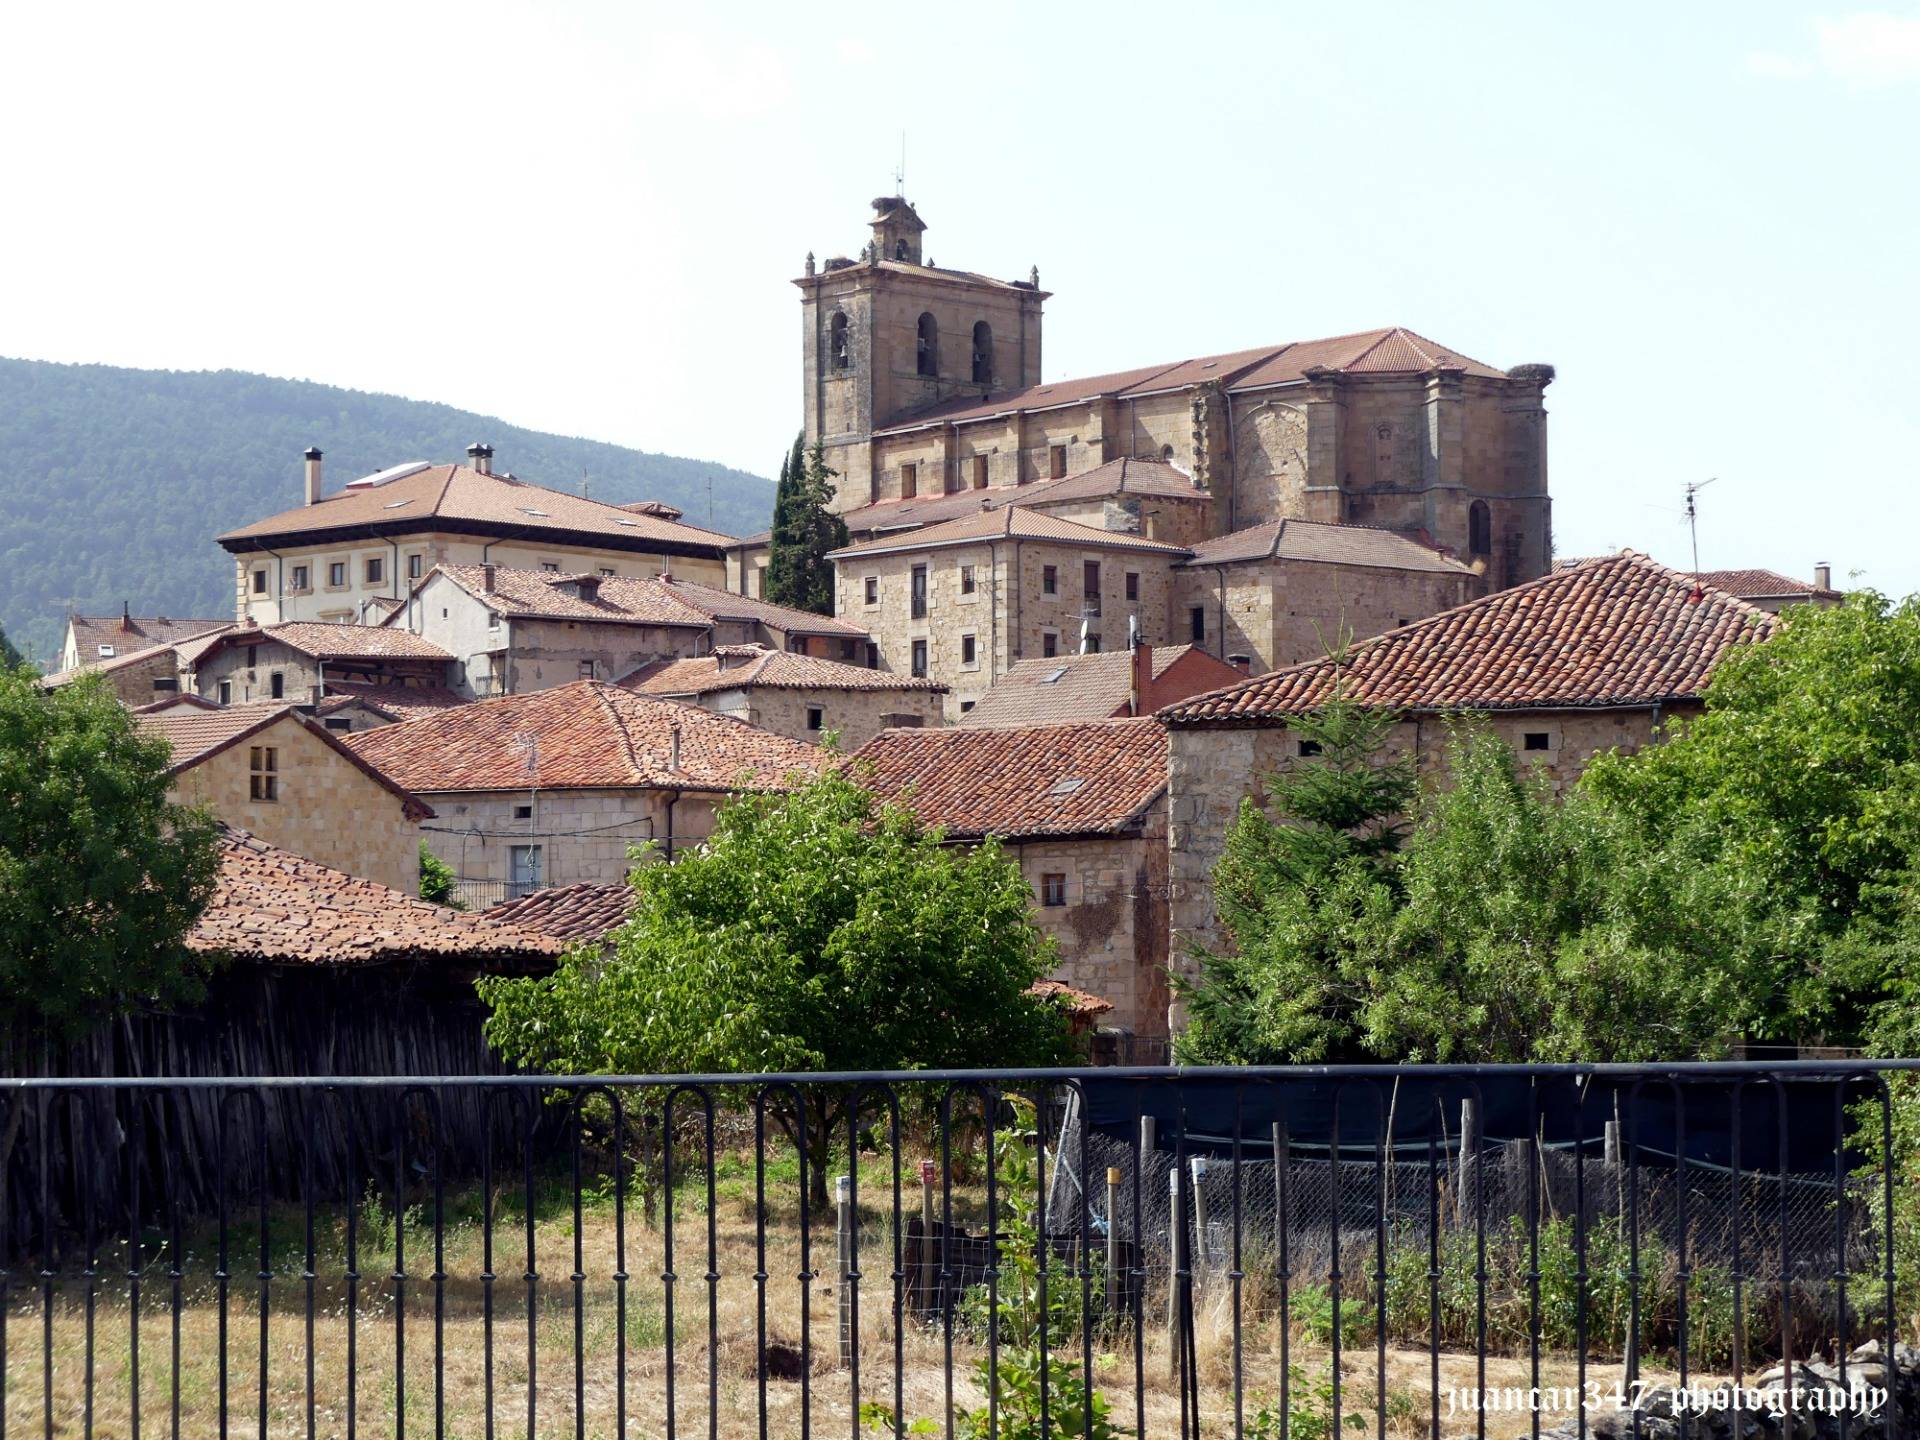 General view with the gothic church overhanging